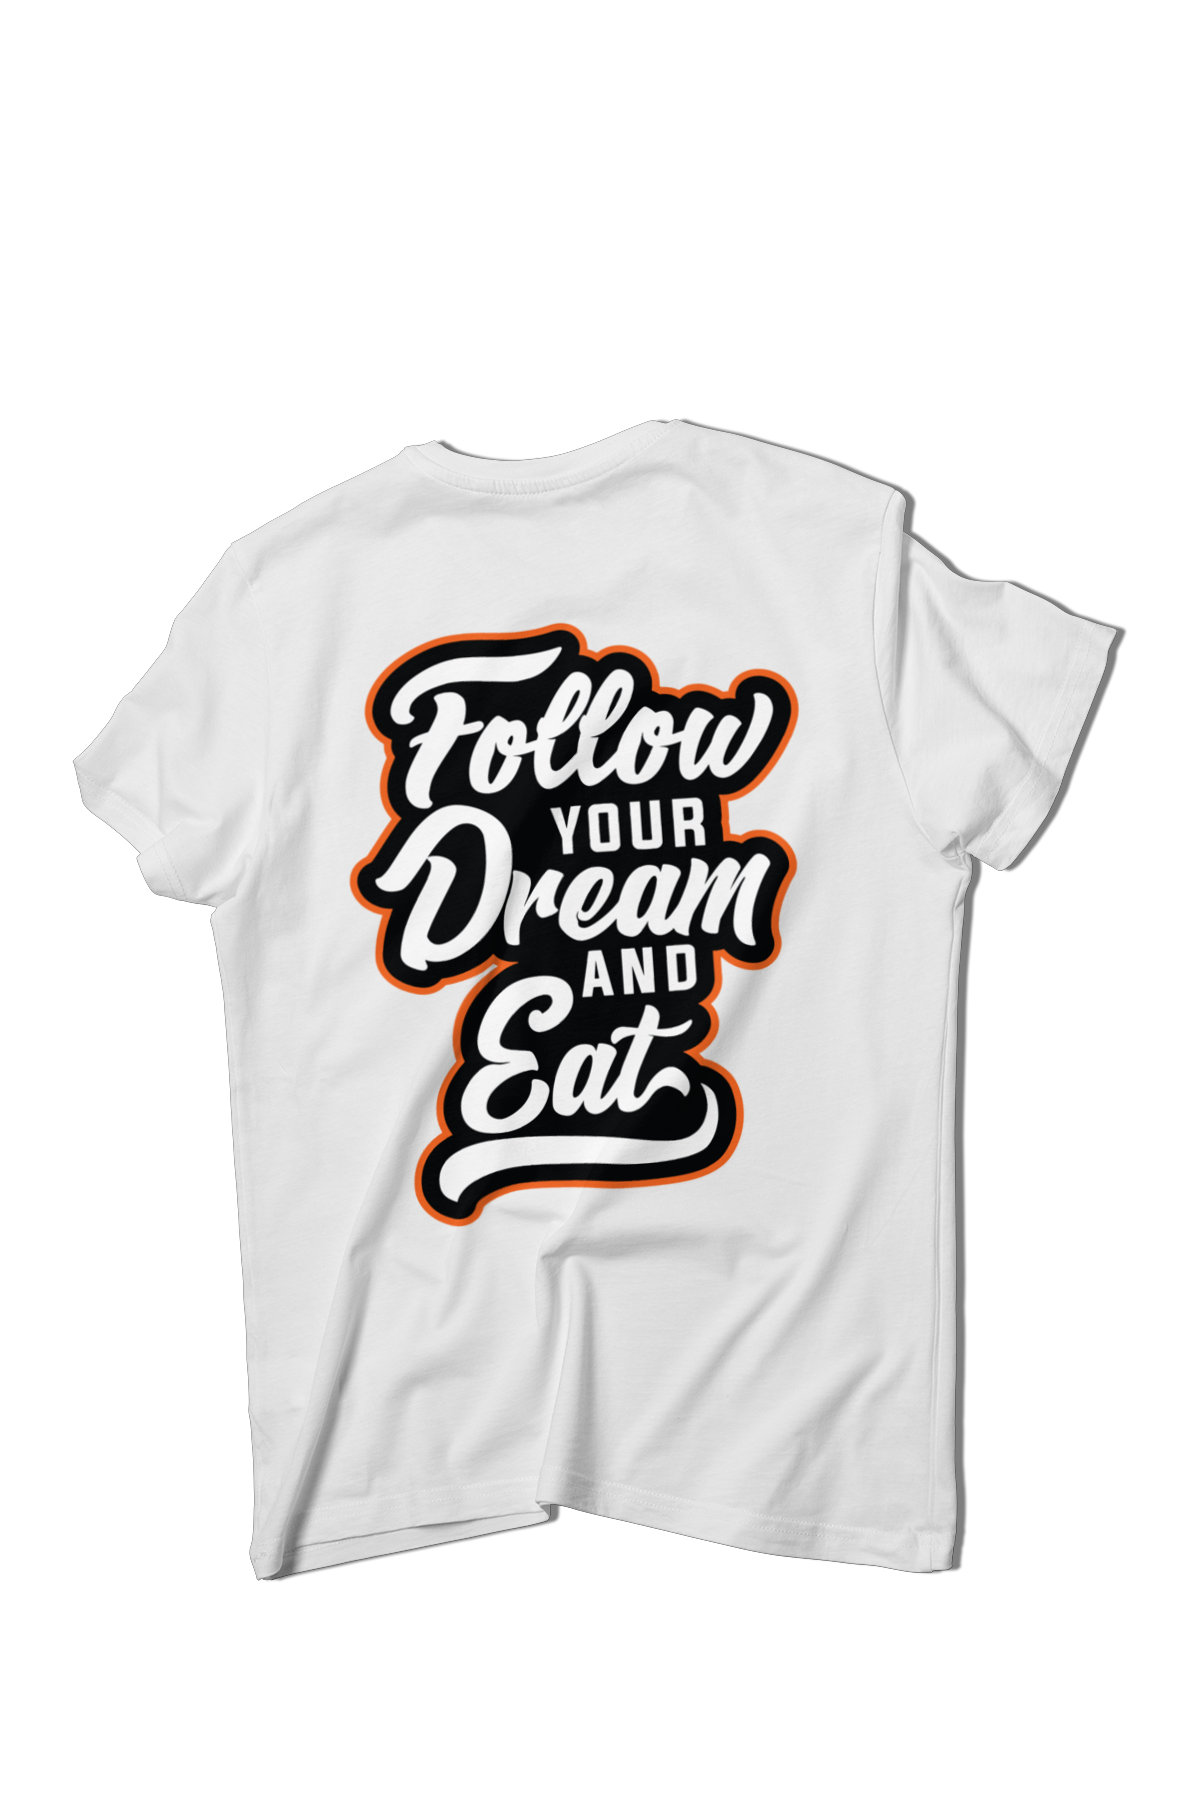 Follow Your Dream and Eat / White T-shirt